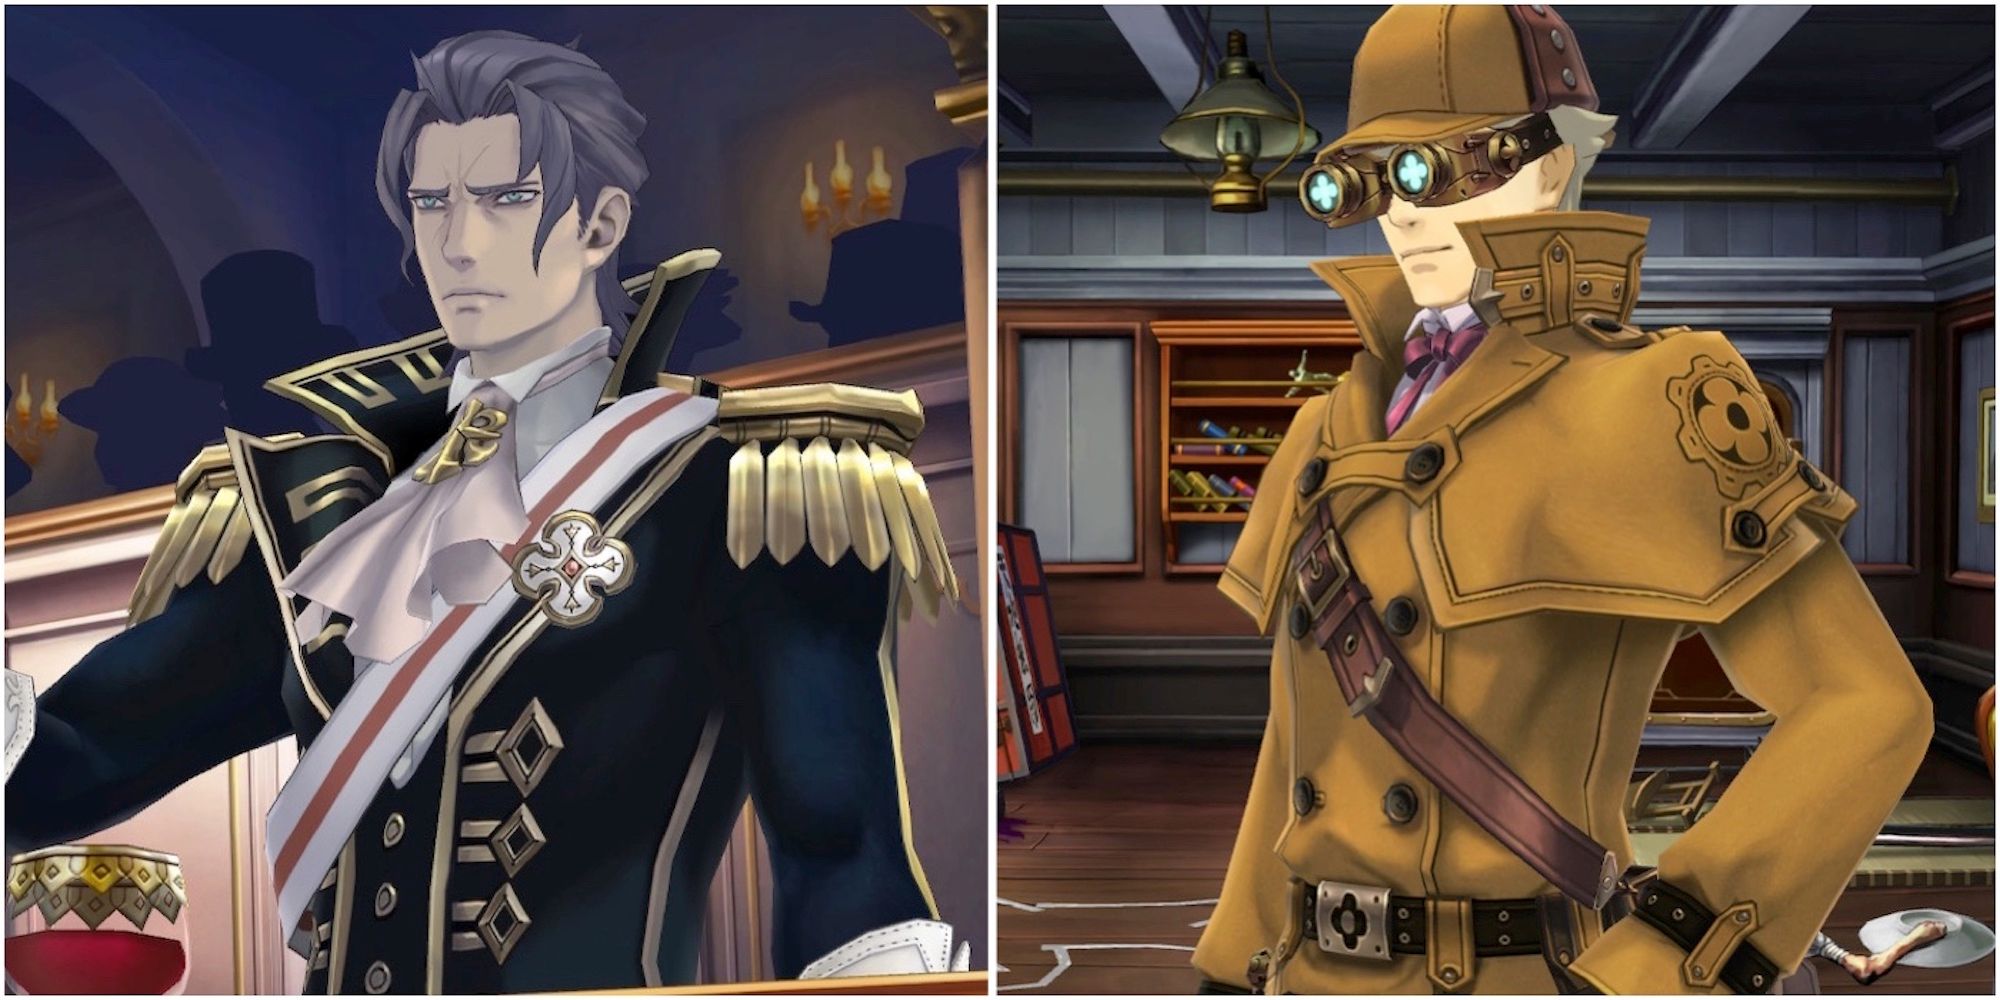 Van Zieks and Sholmes from The Great Ace Attorney Chronicles